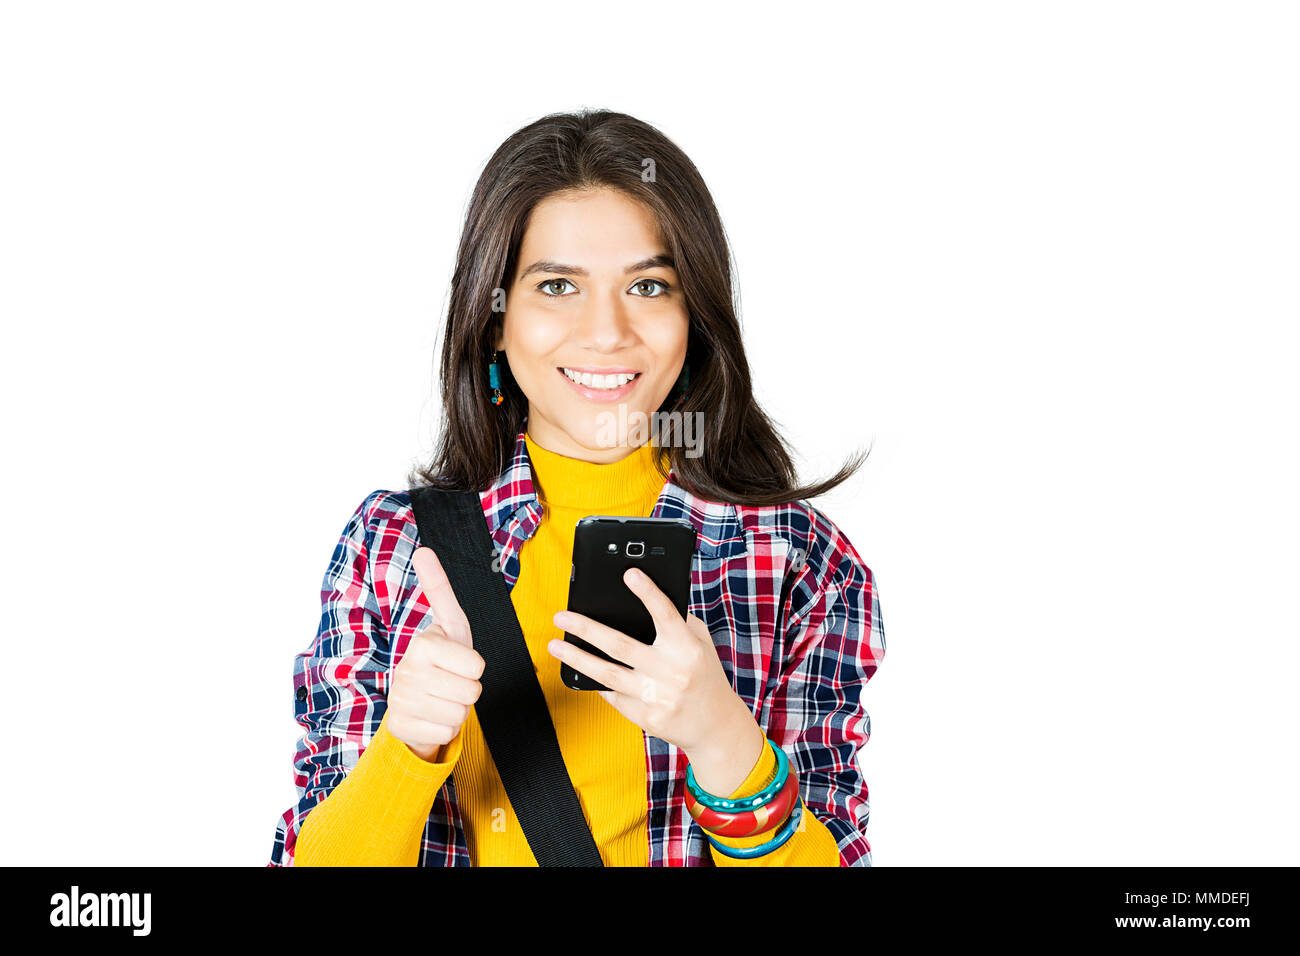 One Young Woman college student SendingText-Message On Mobile Phone Stock Photo